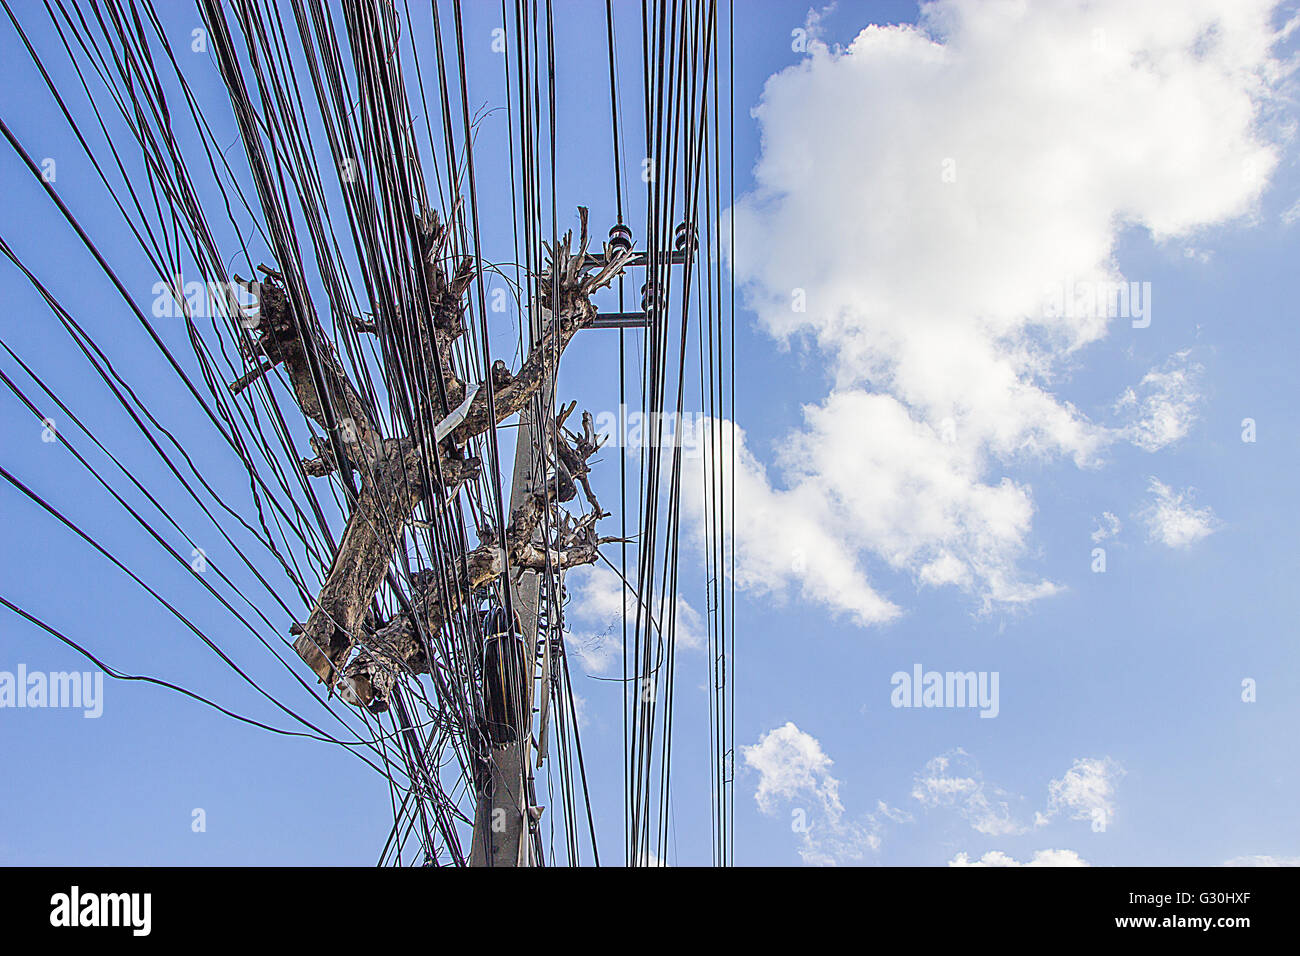 Timber on the power cable Stock Photo